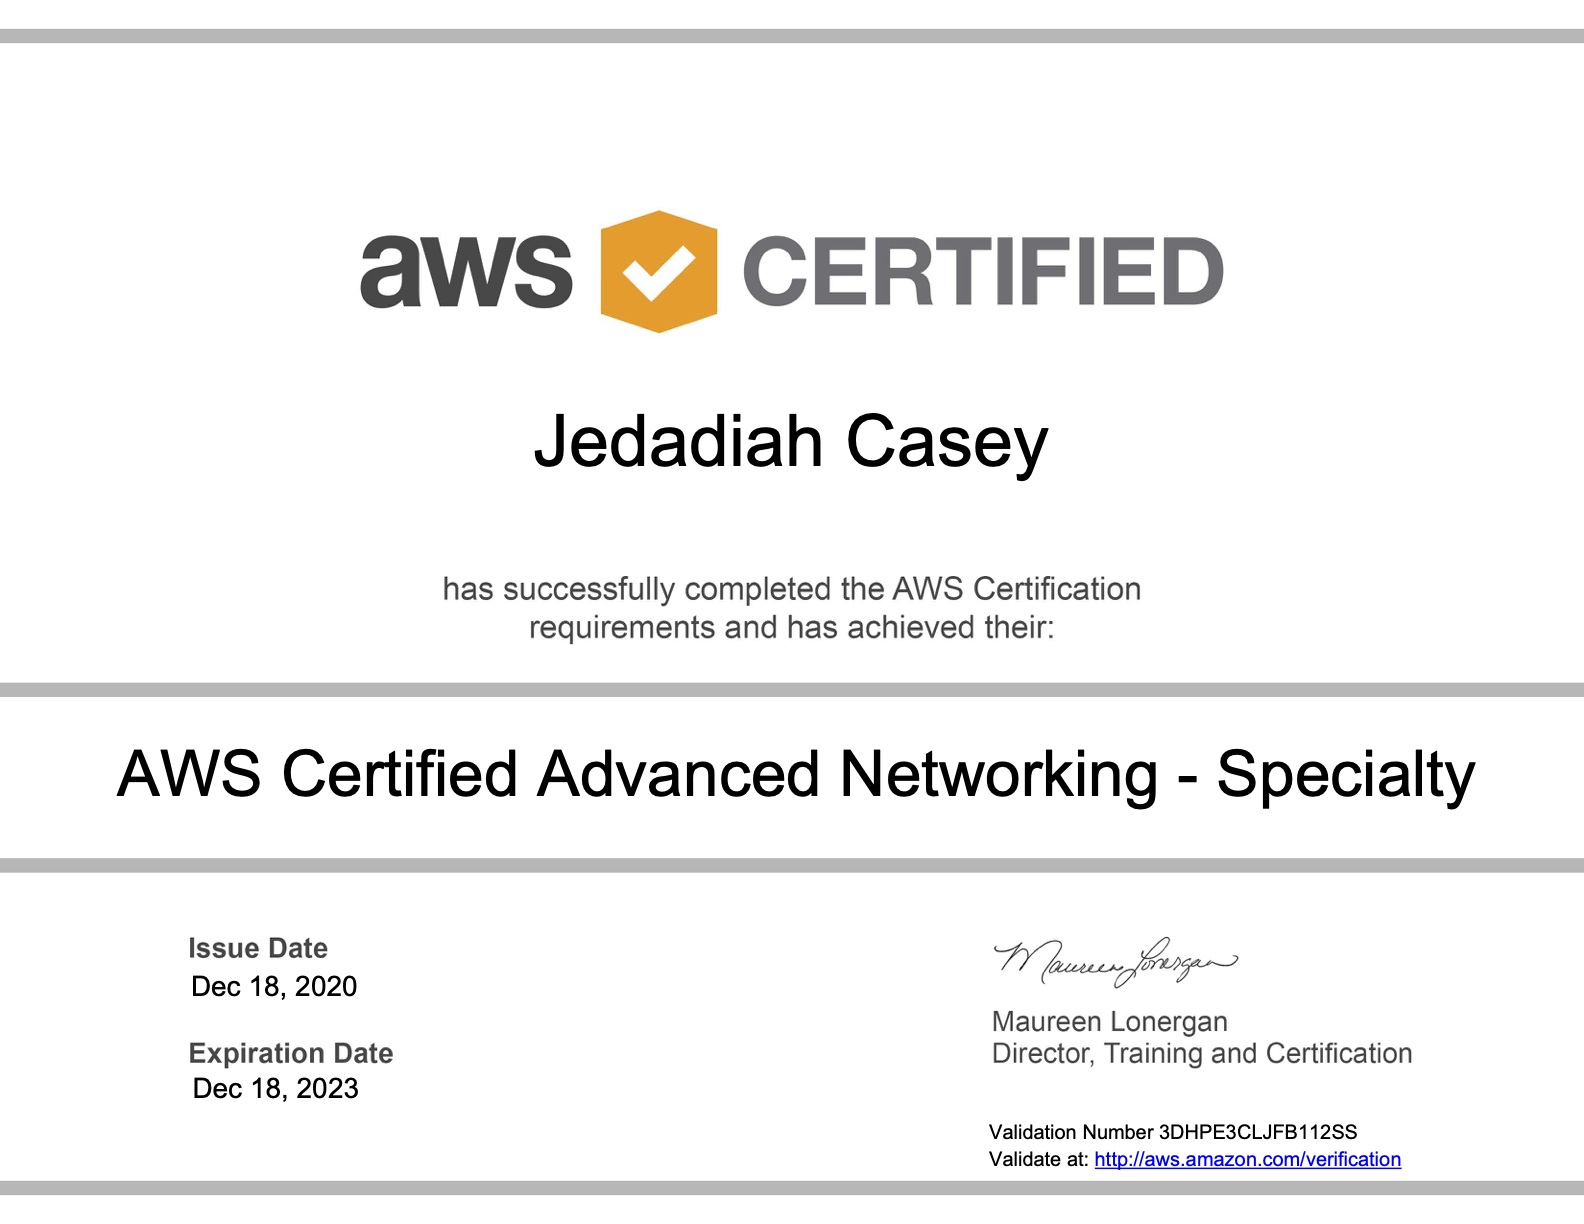 AWS Certified Advanced Networking Specialty